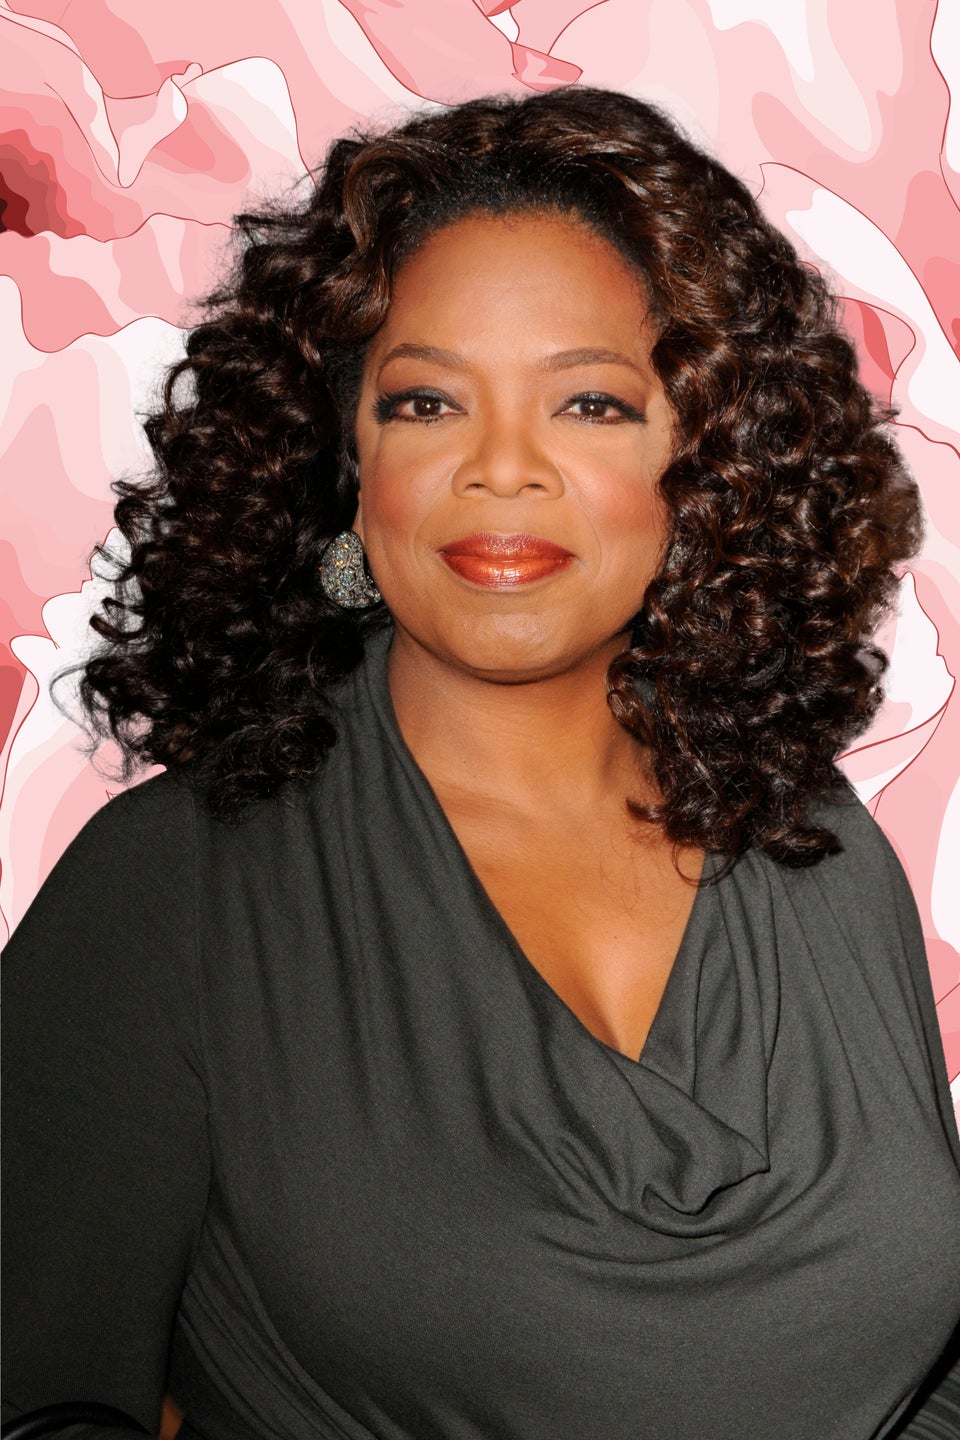 Oprah Will Be Honored With Exhibit At National Museum of African American History and Culture